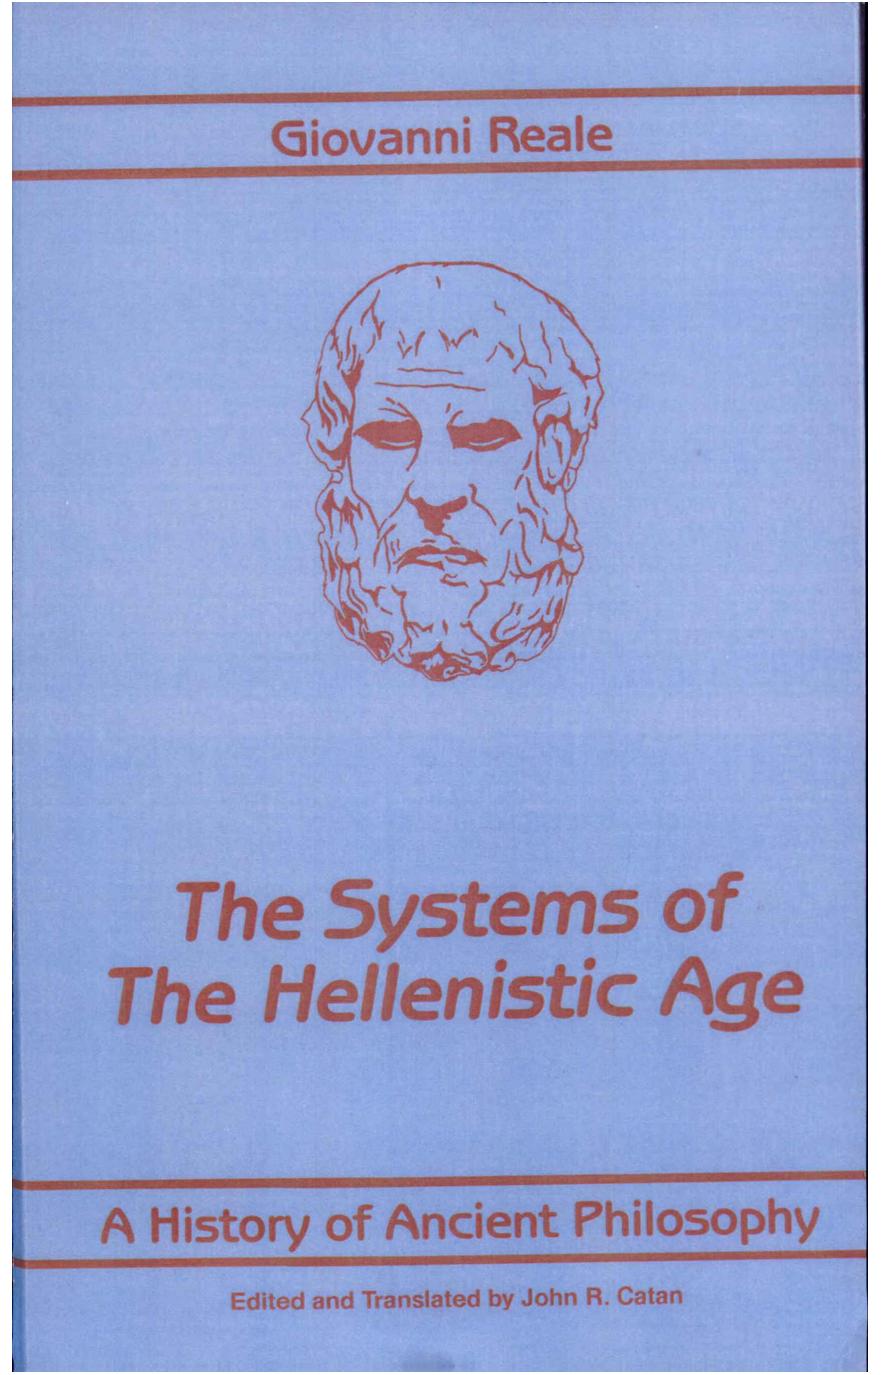 A History of Ancient Philosophy: The Systems of the Hellenistic Age